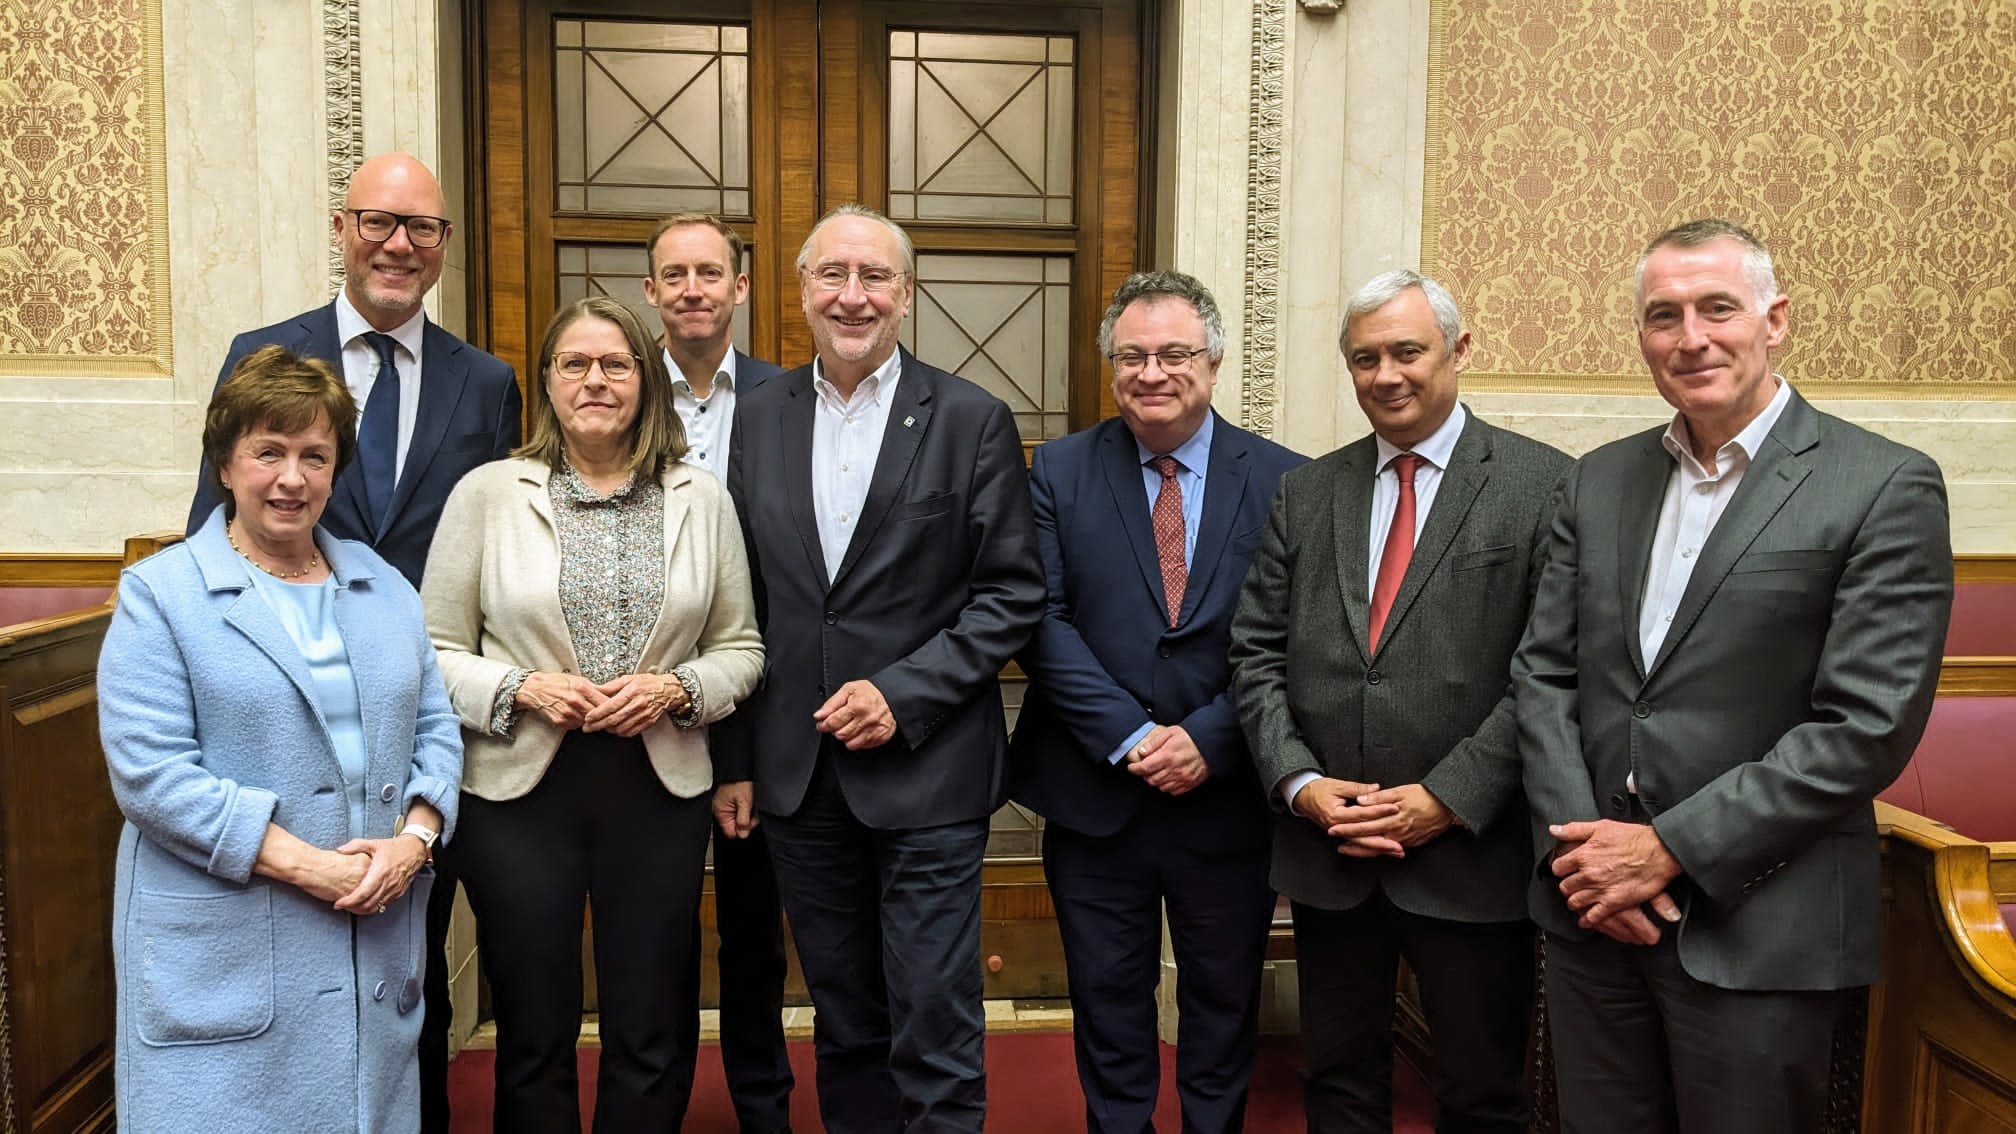 Local politicians with members of the European Parliament International Trade Committee at their meeting in Parliament Buildings